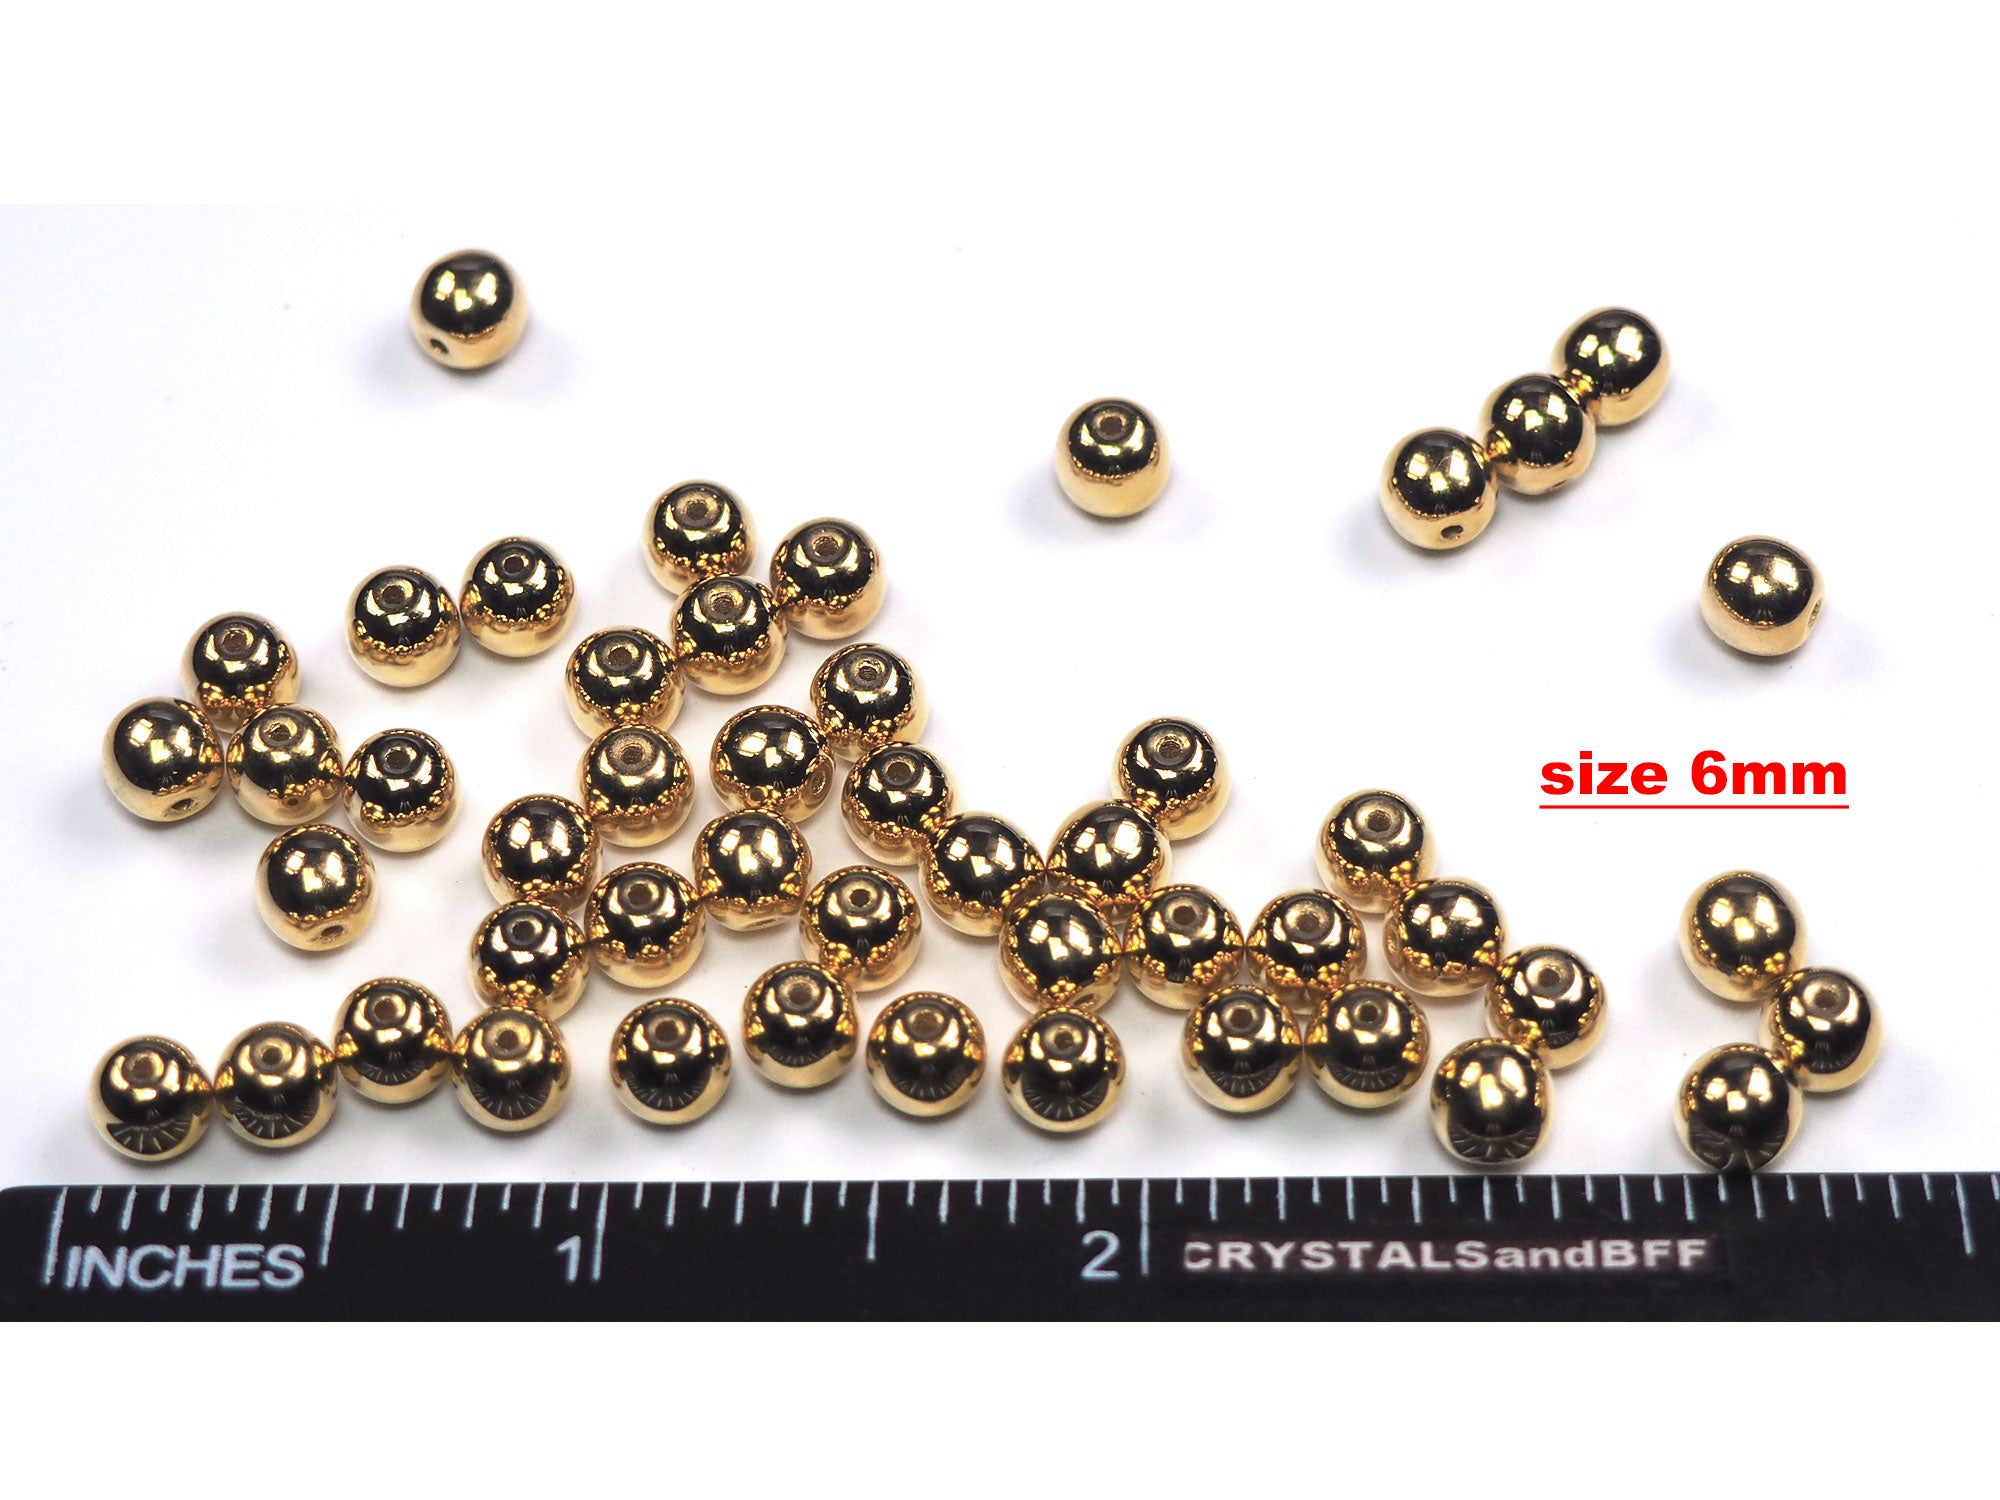 Czech Glass Druk Round Beads in sizes 4mm and 6mm, Smooth Pressed Beads, Crystal Full Aurum Gold